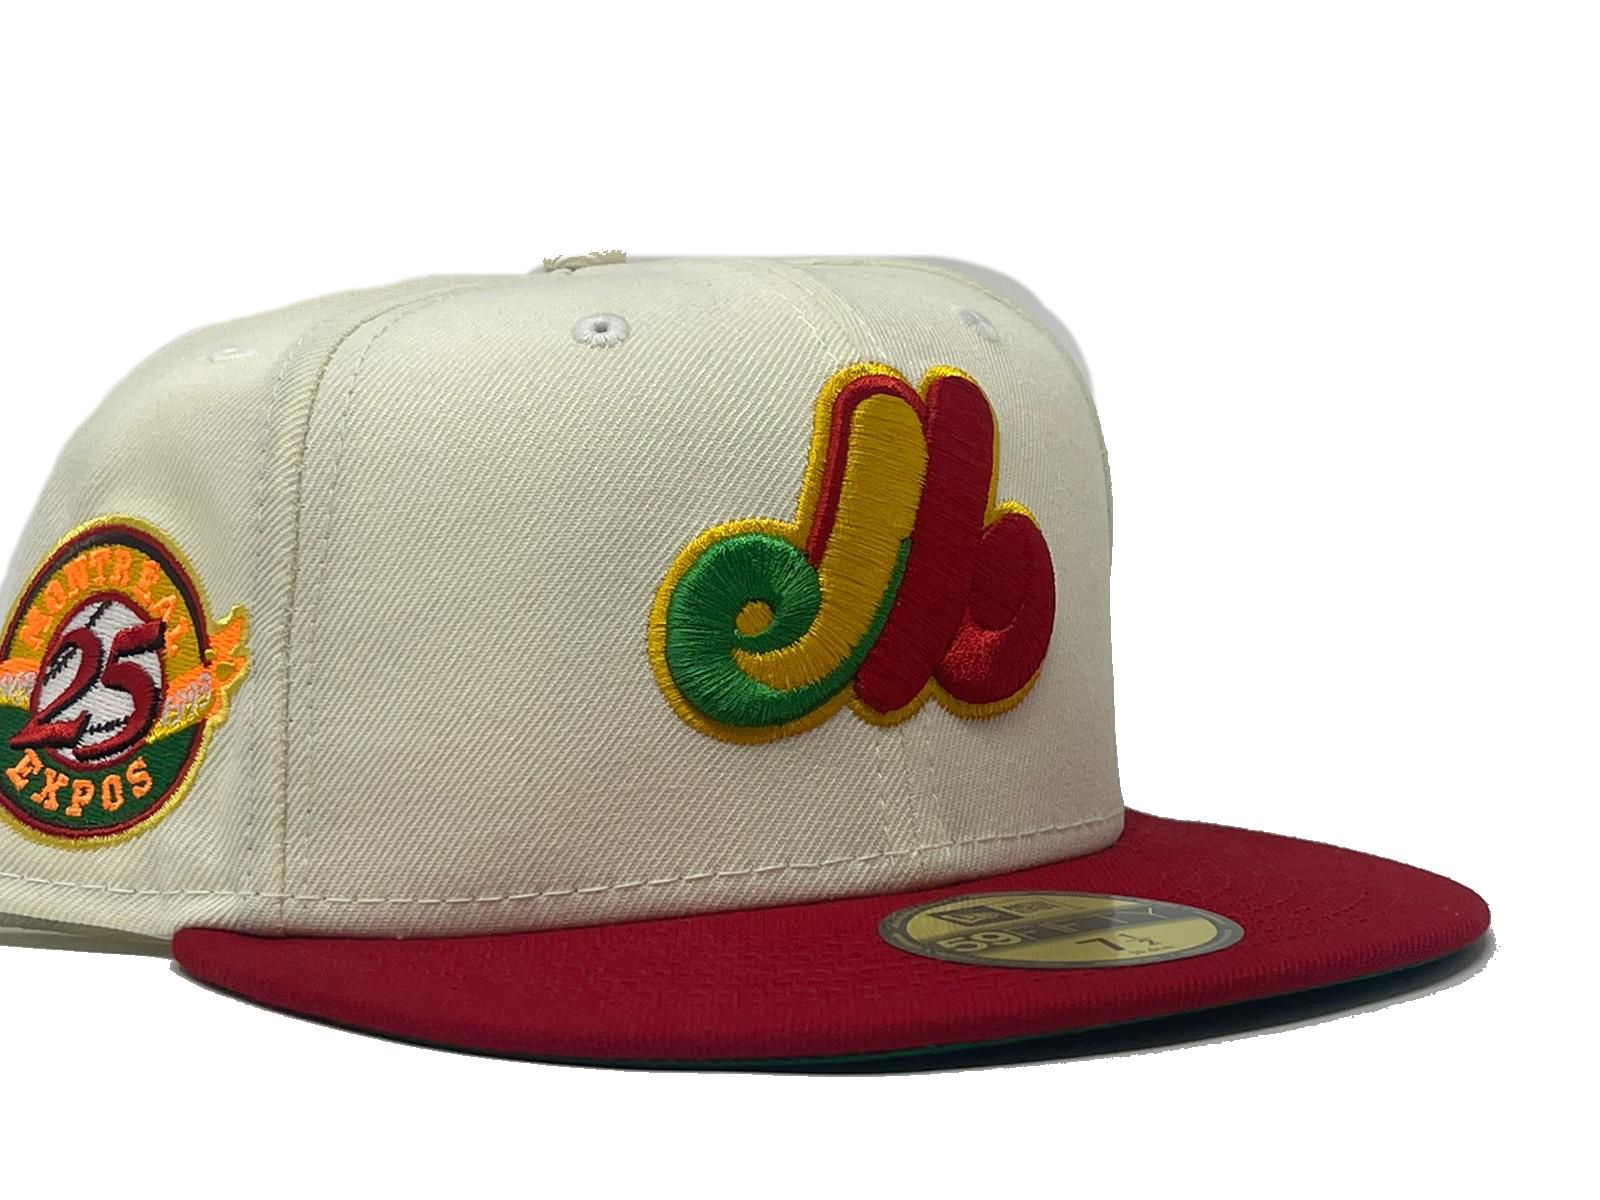 New Era Montreal Expos White Retro 59FIFTY Fitted Hat, White, POLYESTER, Size 7 3/4, Rally House